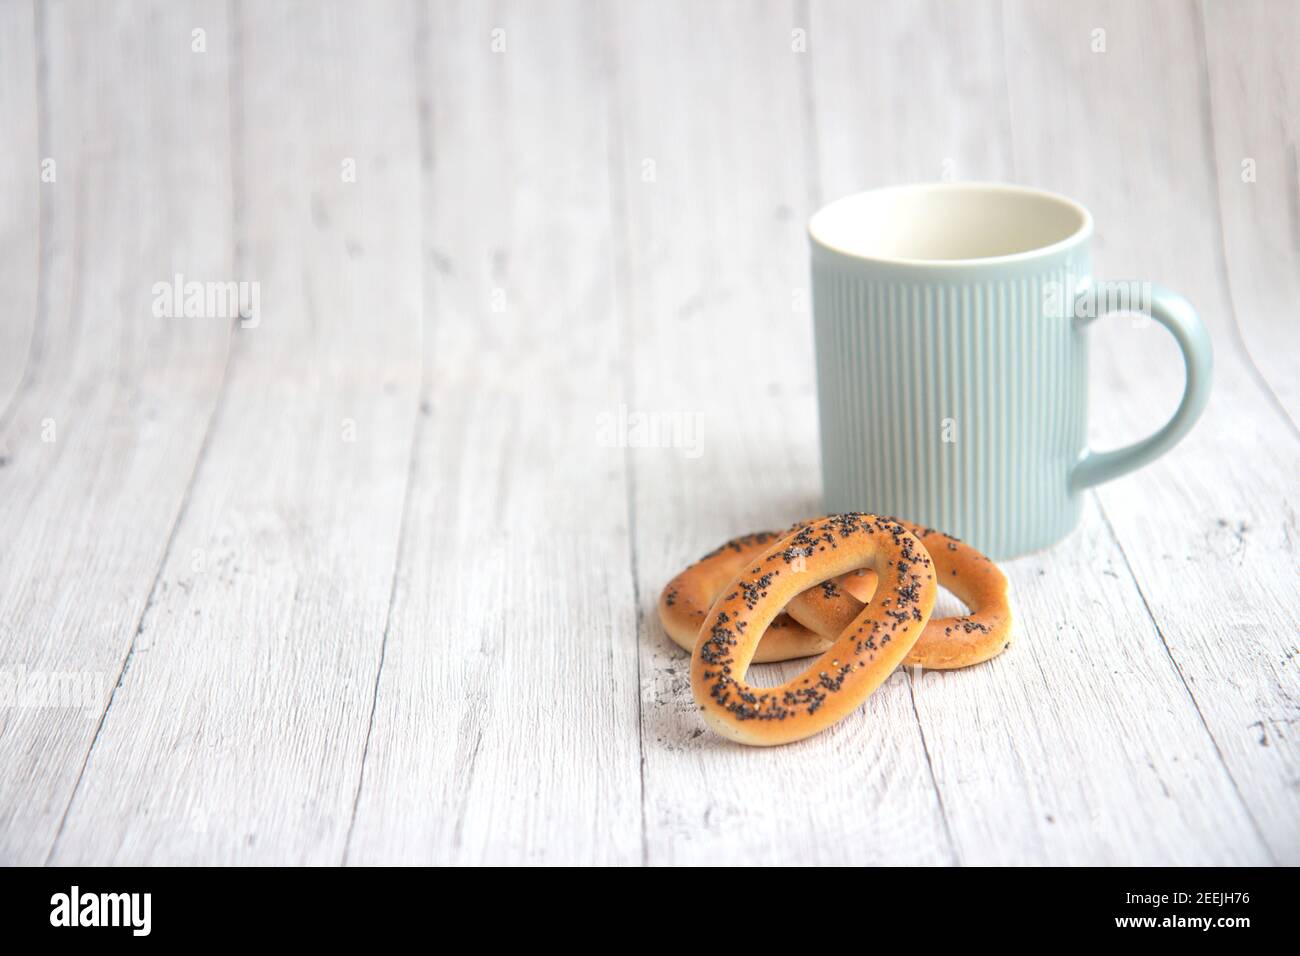 Download Sweet Pretzel With Cup Of Coffee High Resolution Stock Photography And Images Alamy